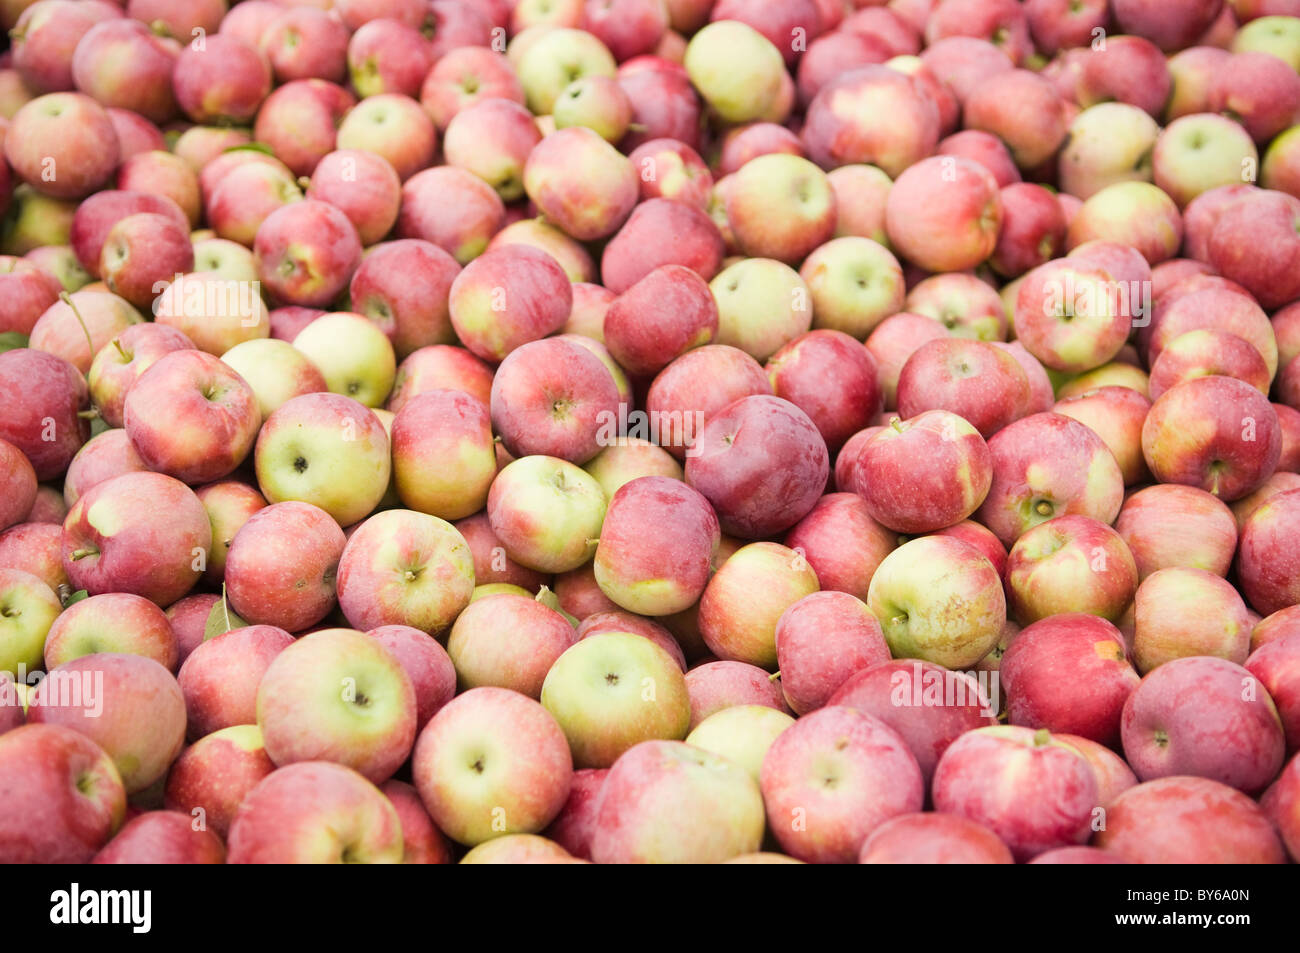 Large crate full of freshly picked apples Stock Photo